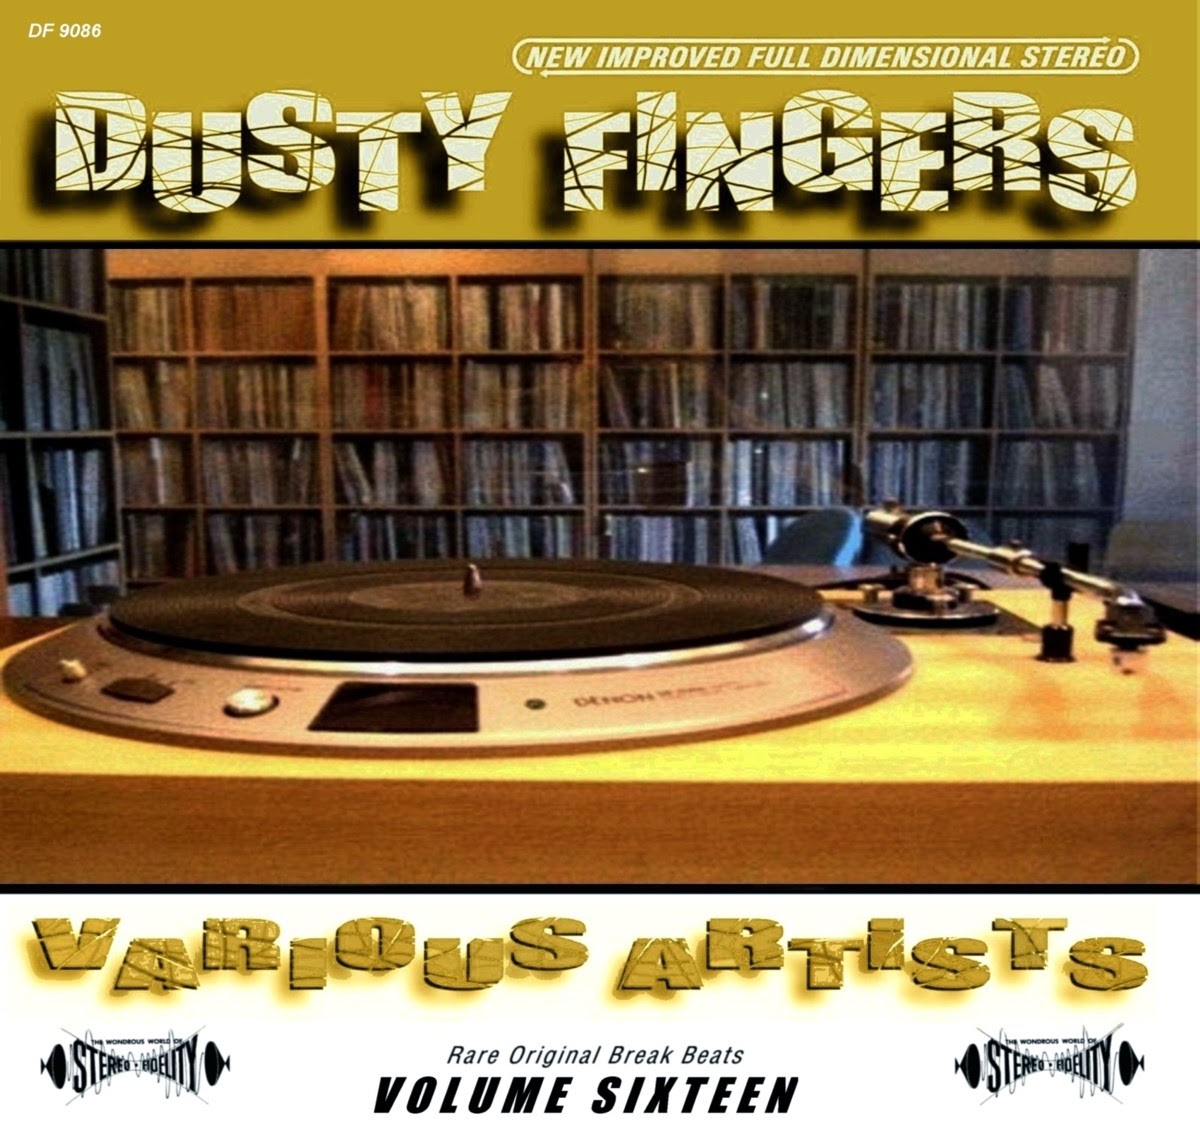 VA - Dusty Fingers - The Complete Collection 1997 - 2008